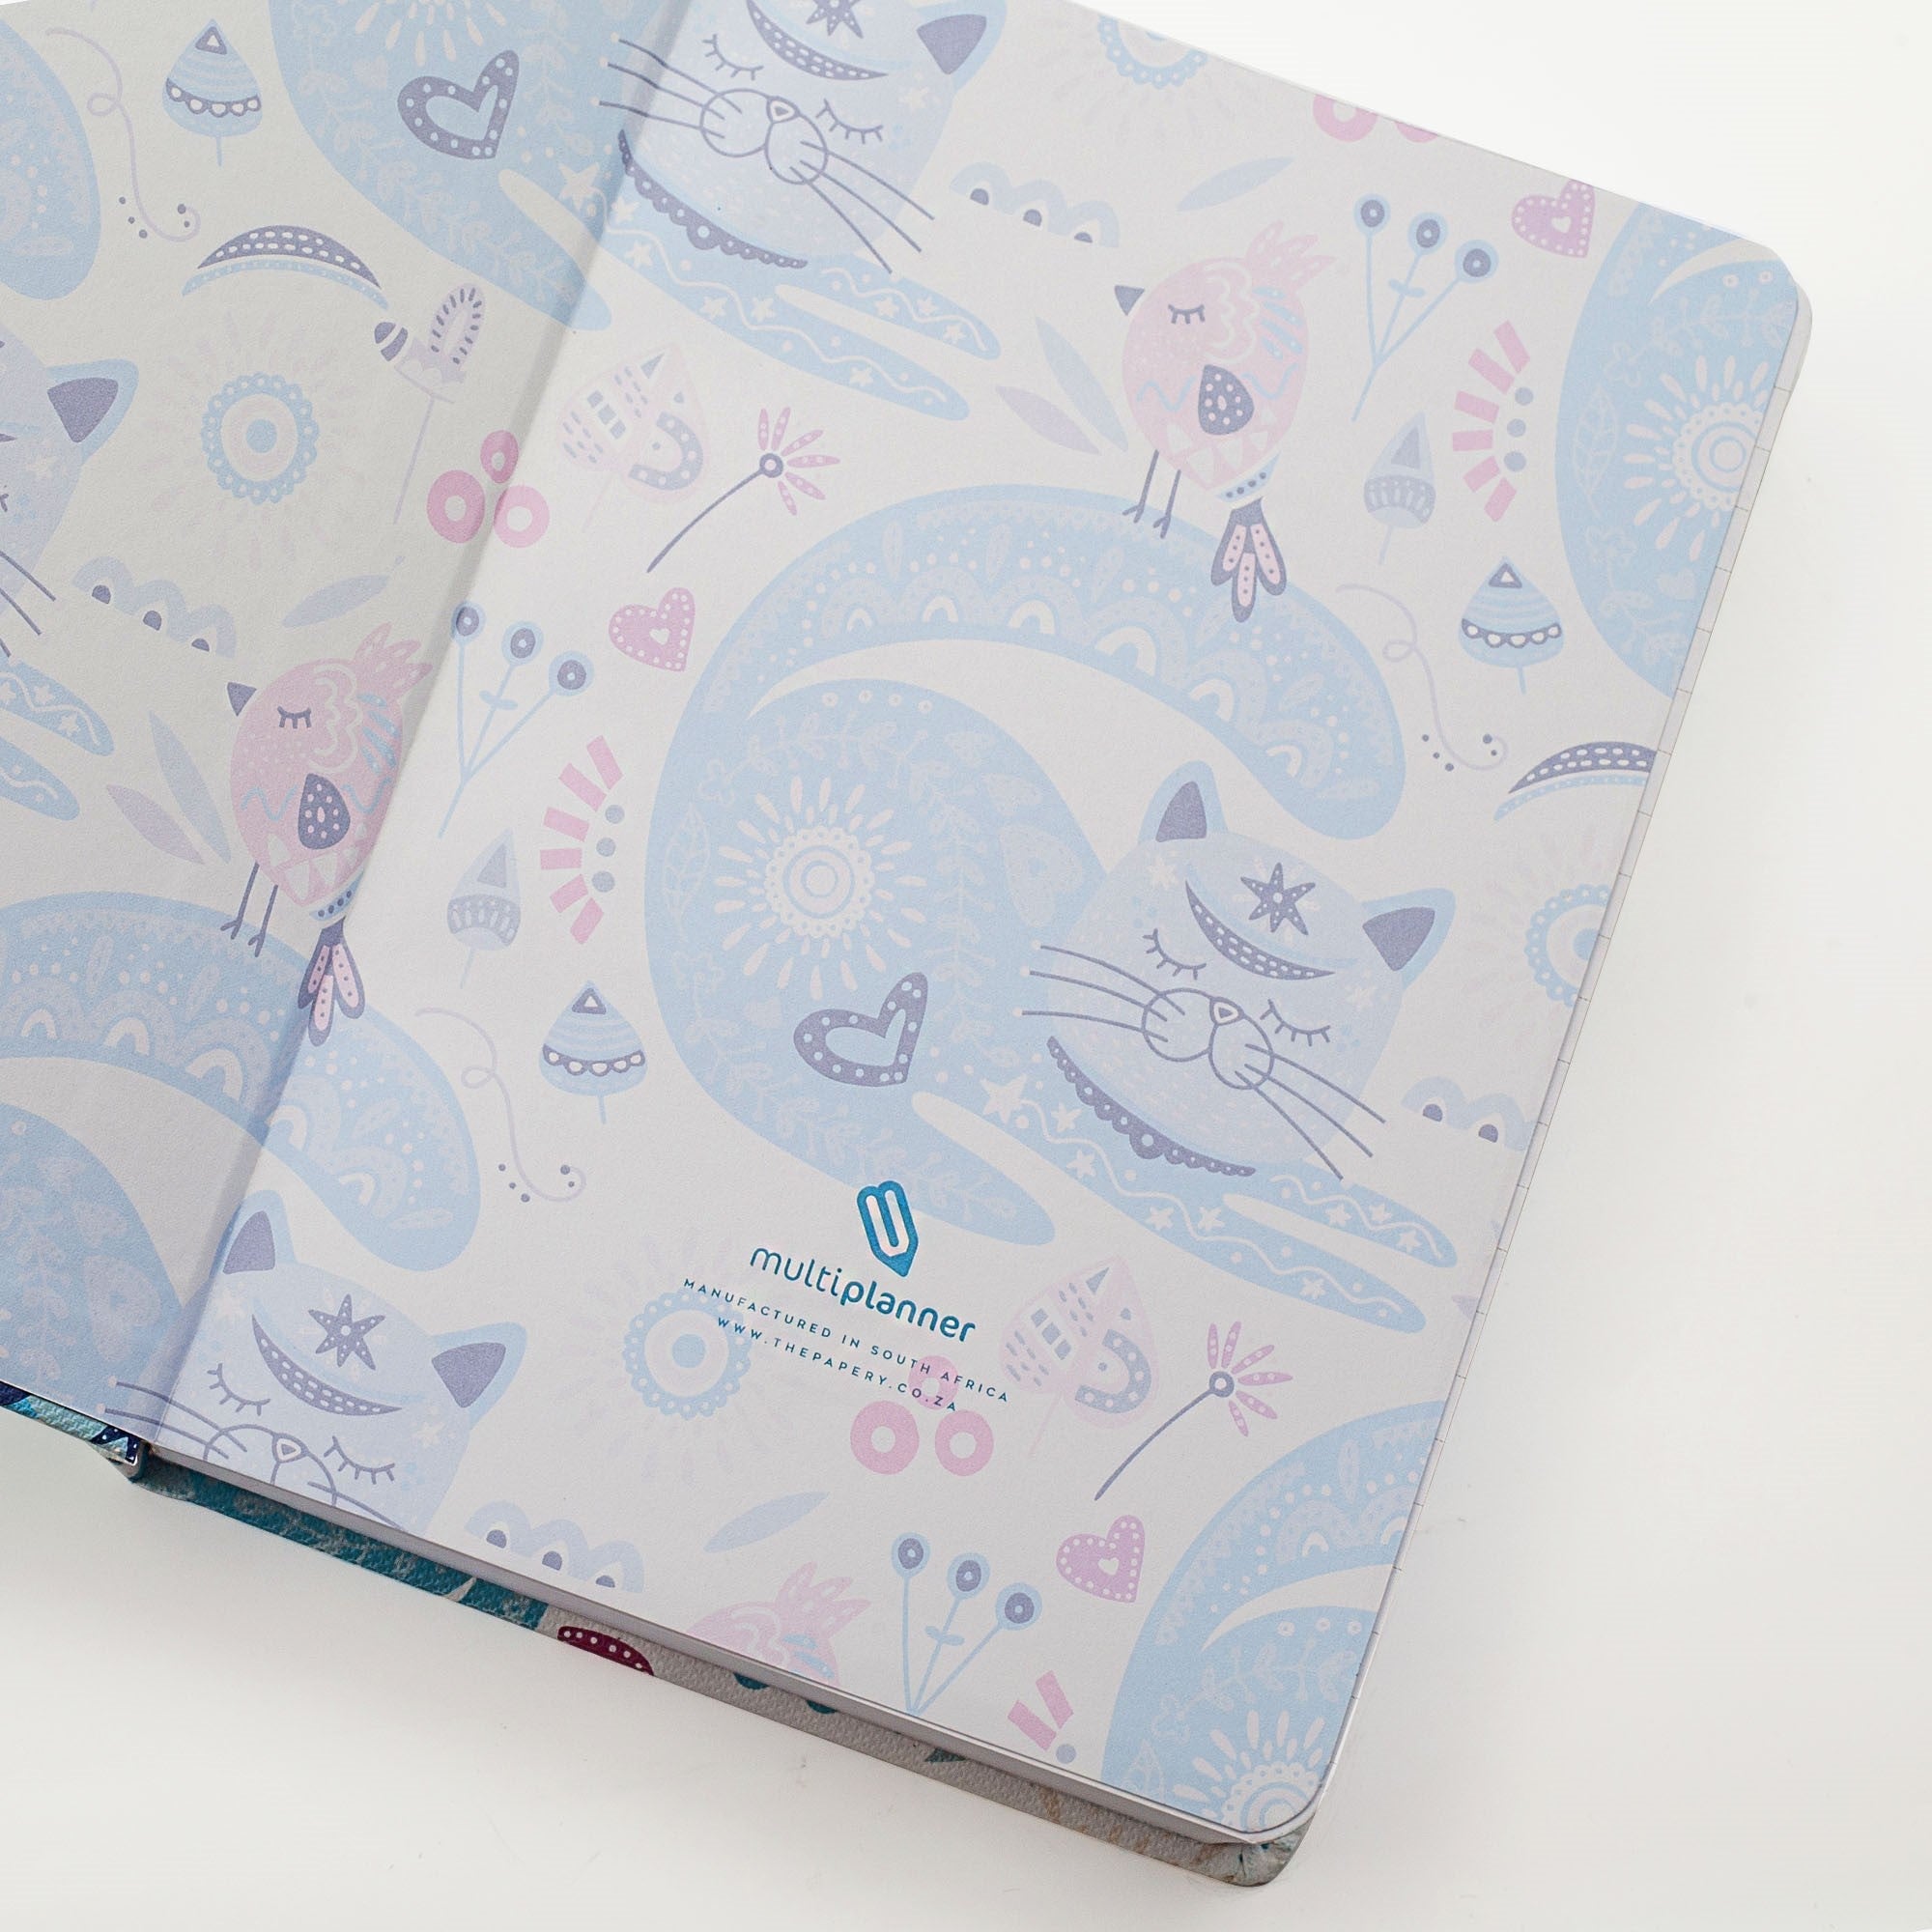 Image shows the endpapers for a Cat MultiPlanner